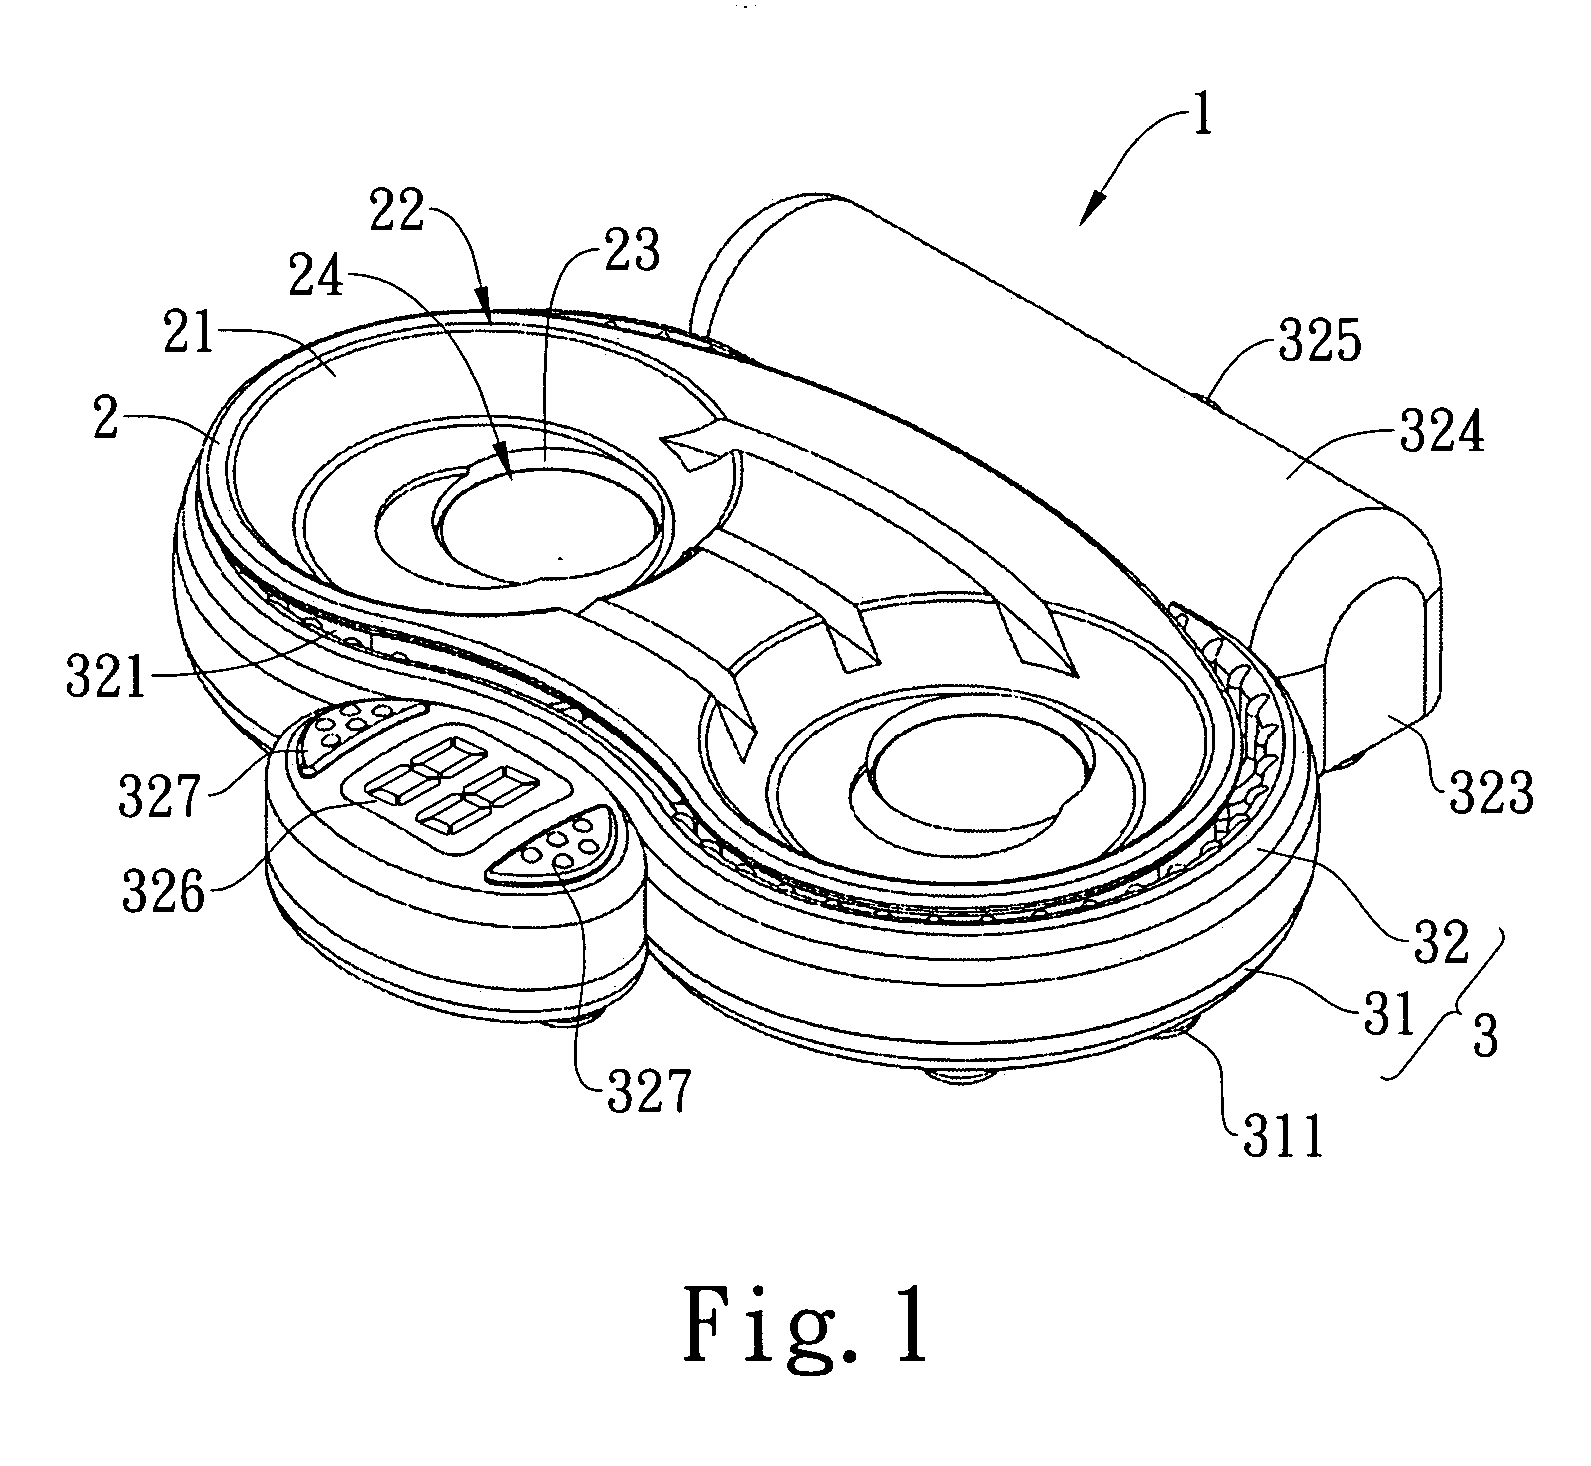 Vibration-type cleaning device for contact lenses